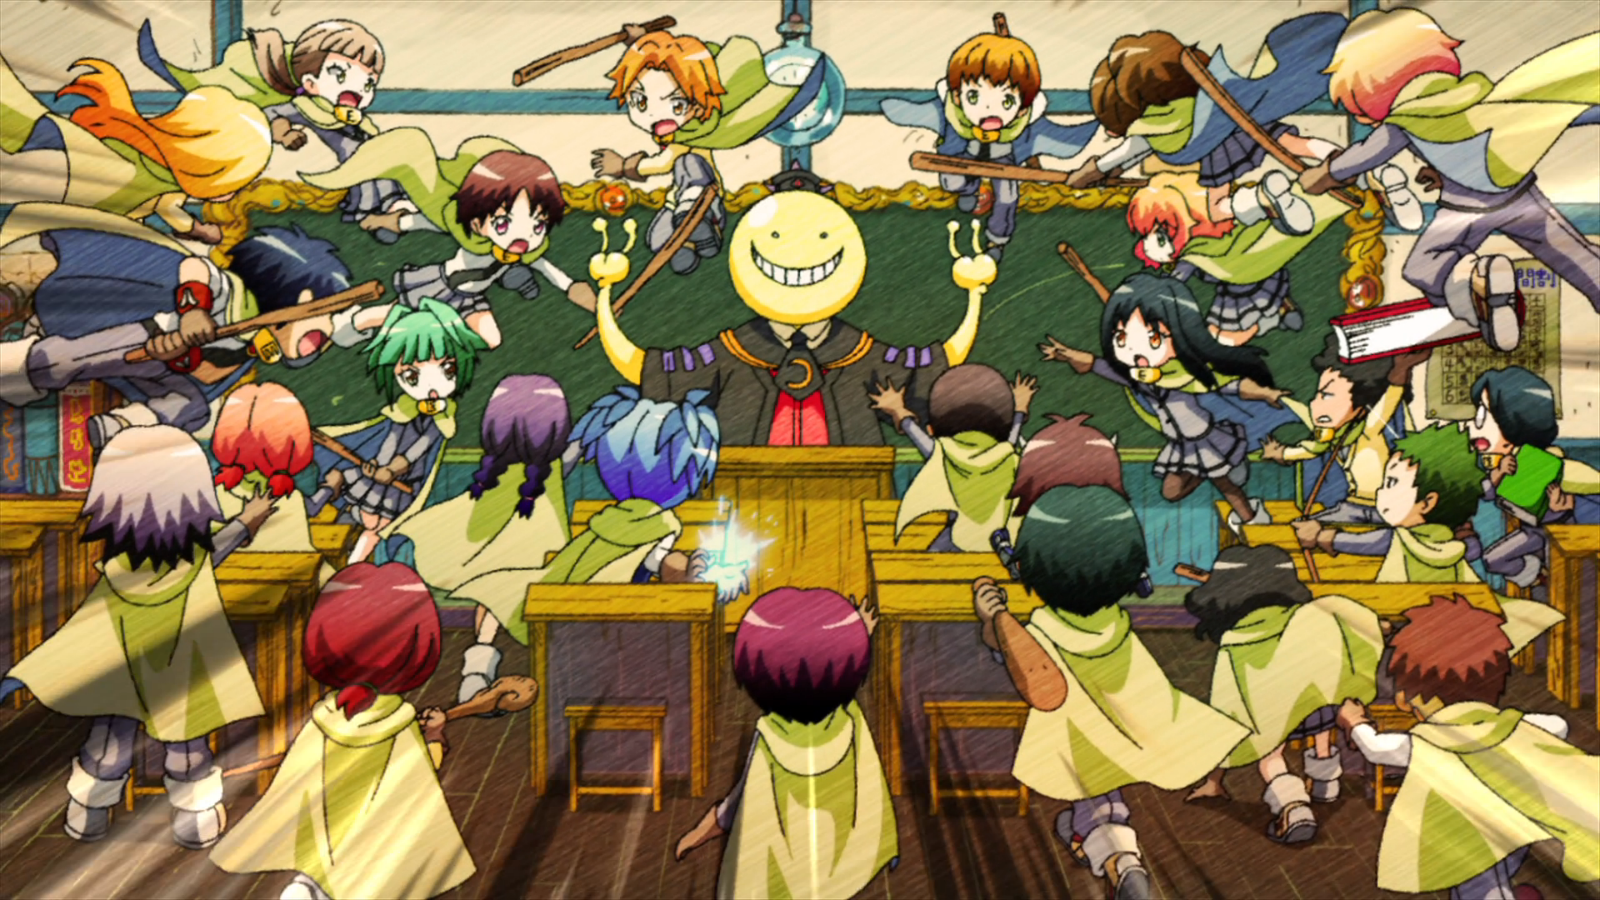 You Wouldn't Think So At First, But This Is Actually - Assassination Classroom Koro Sensei Quest , HD Wallpaper & Backgrounds